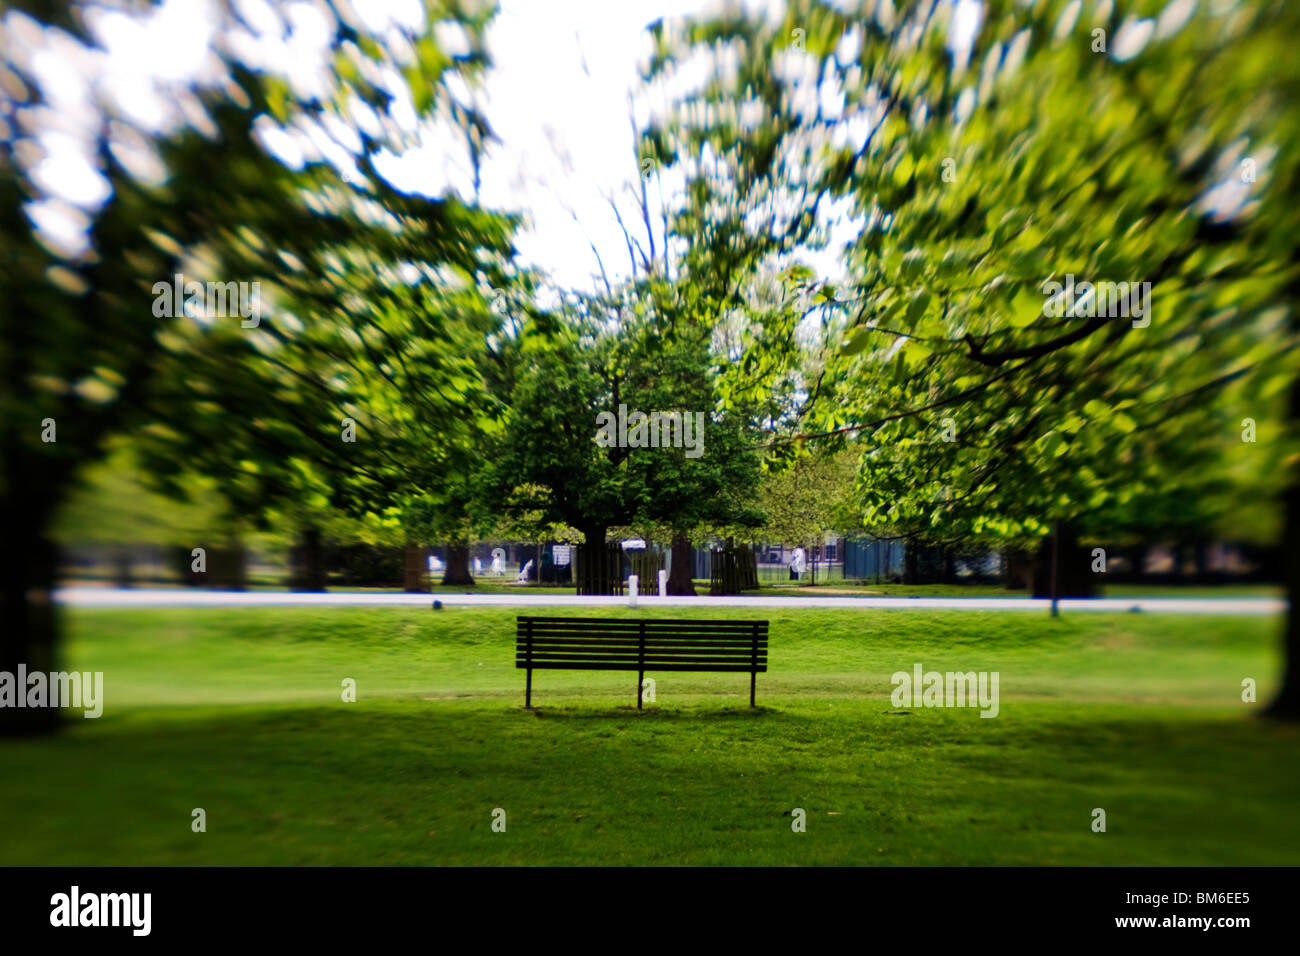 Bench and horse horse chestnut trees Stock Photo